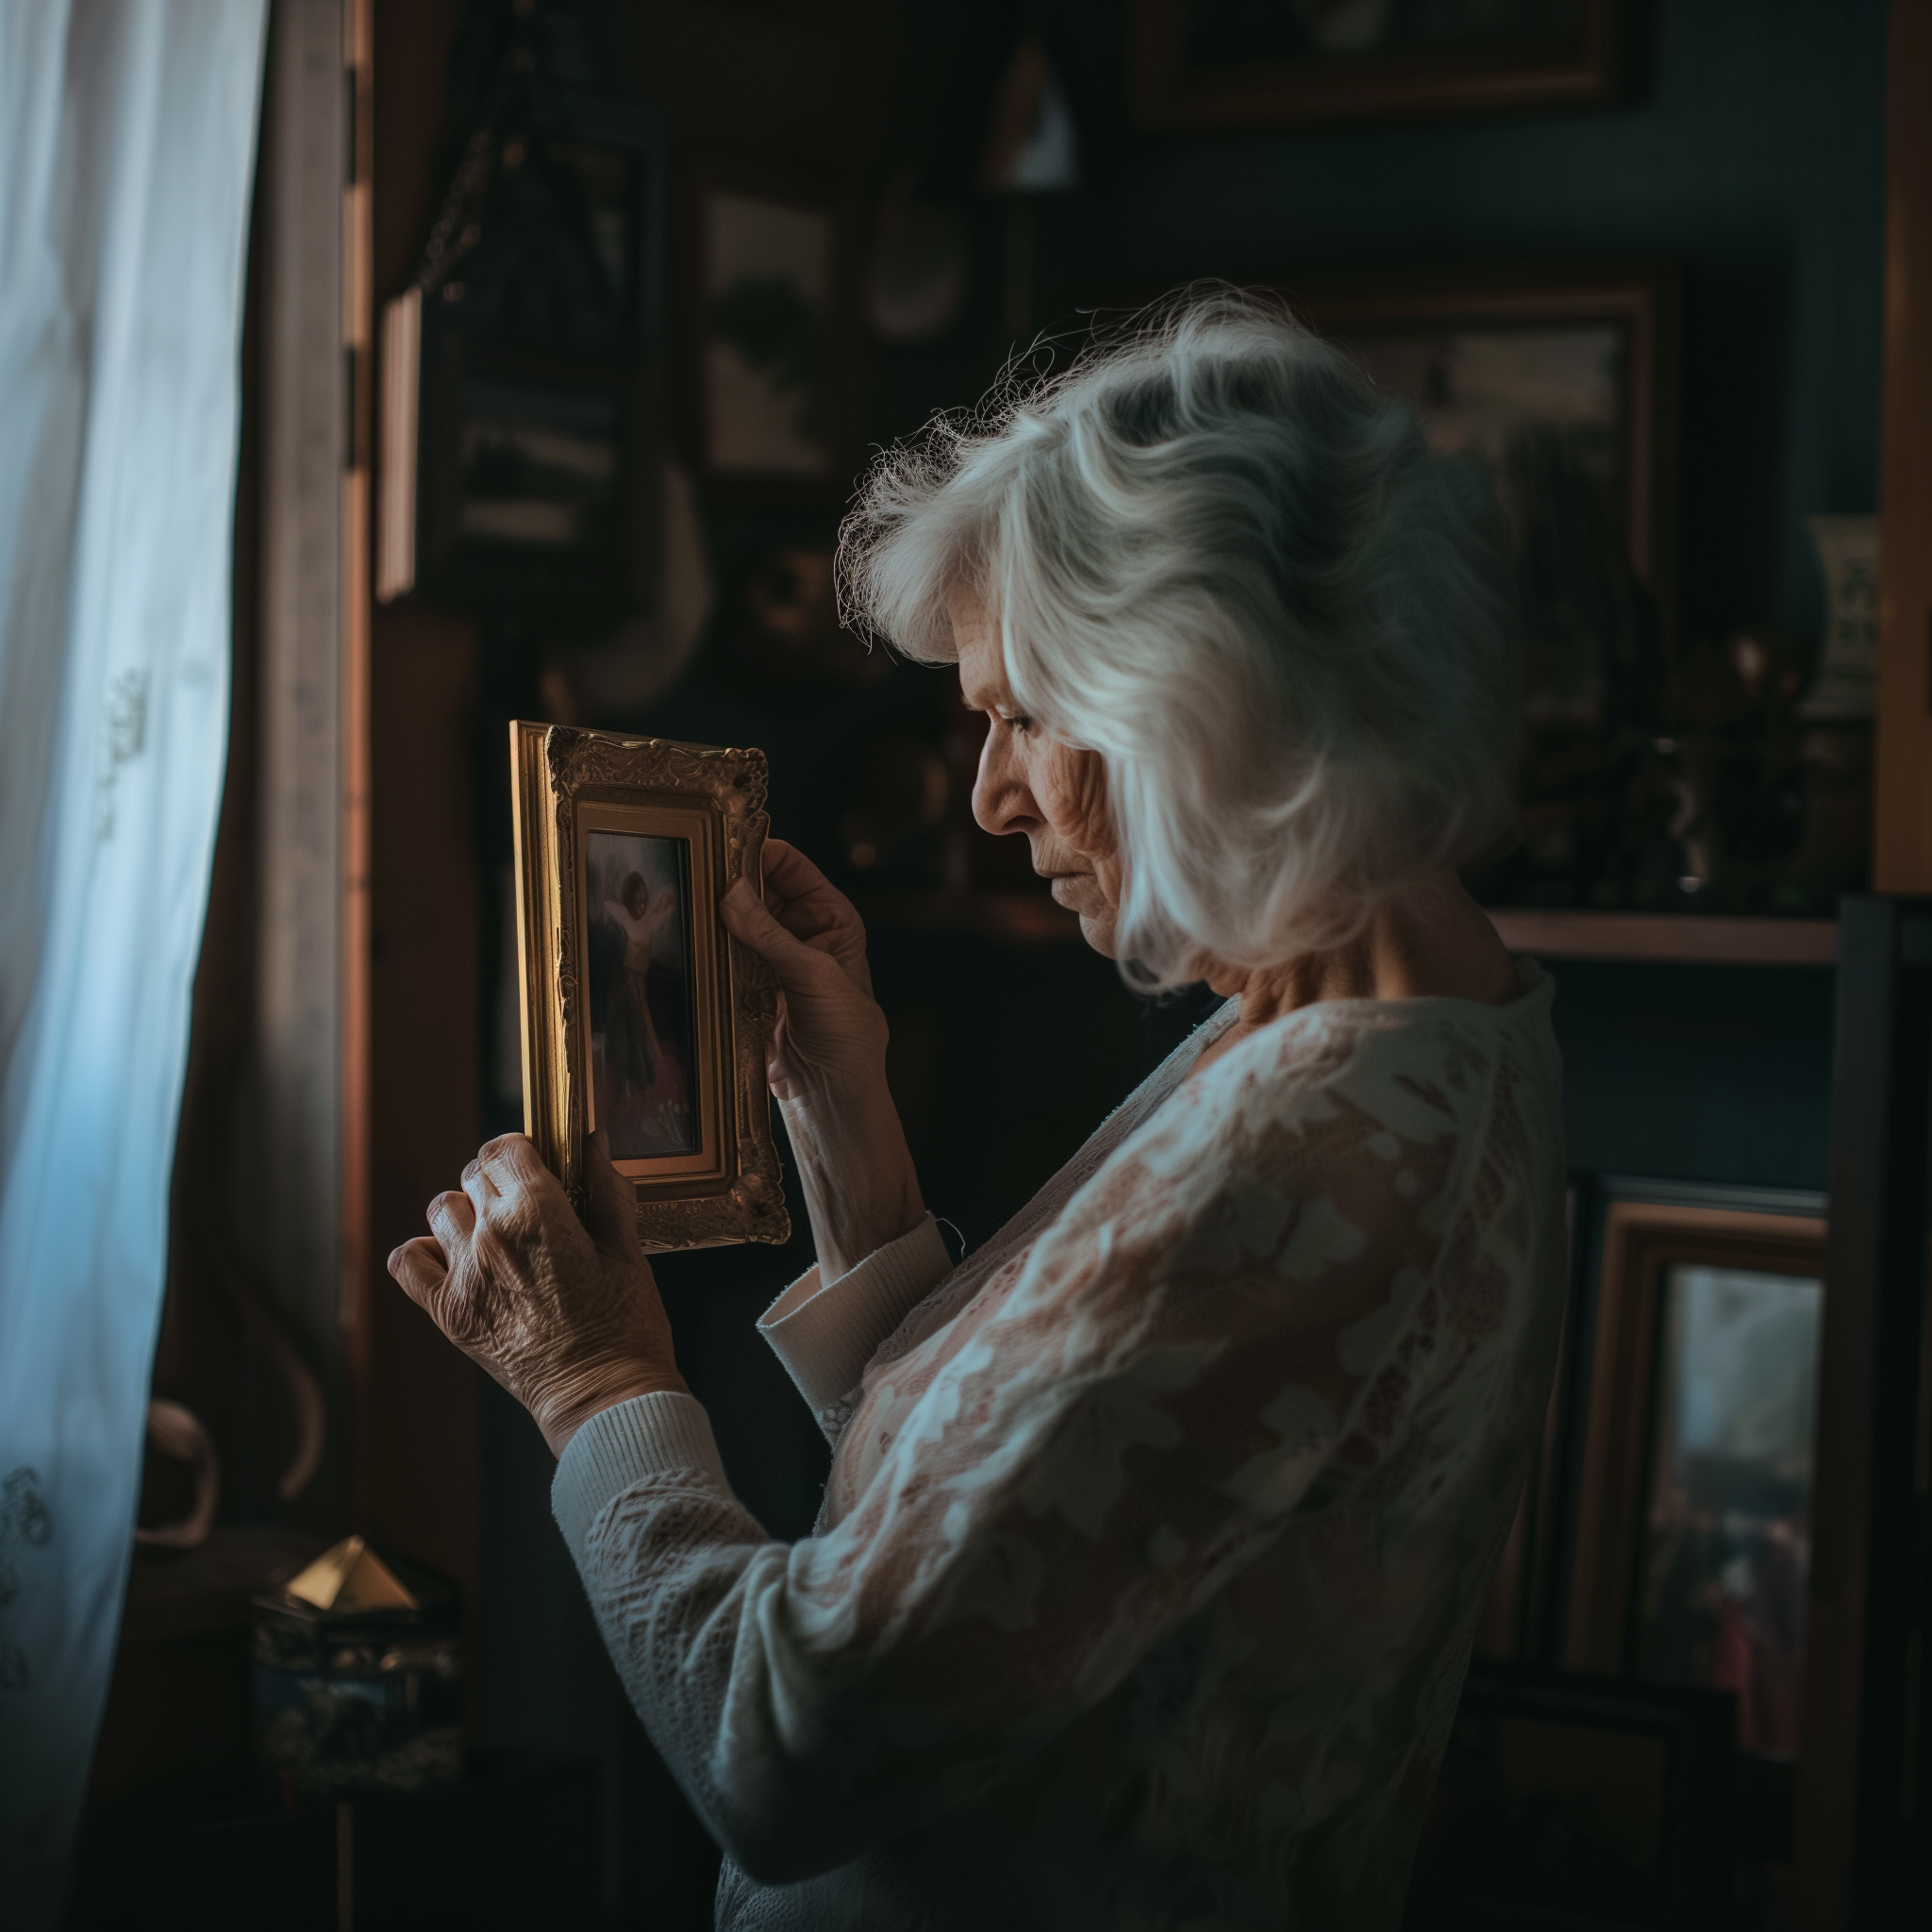 An elderly woman holding a photo frame | Source: Midjourney